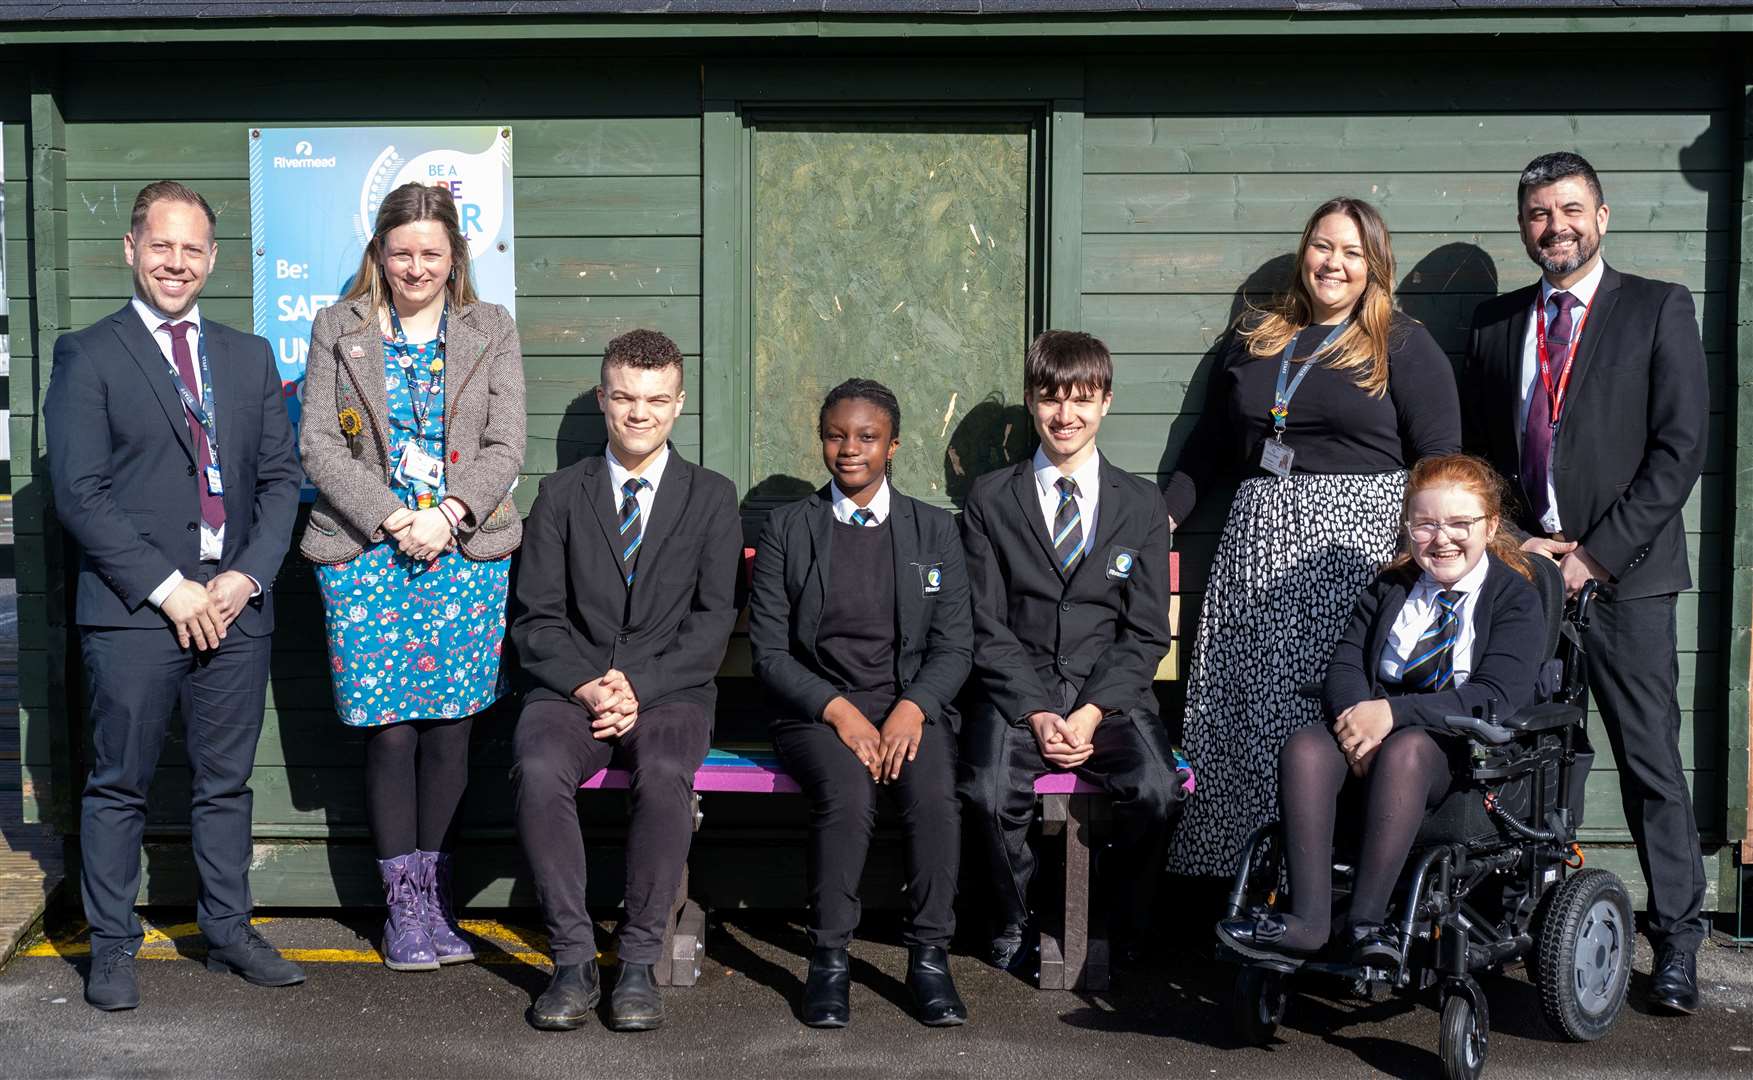 Staff and pupils at Rivermead School, in Gillingham, which has been rated highly by Ofsted